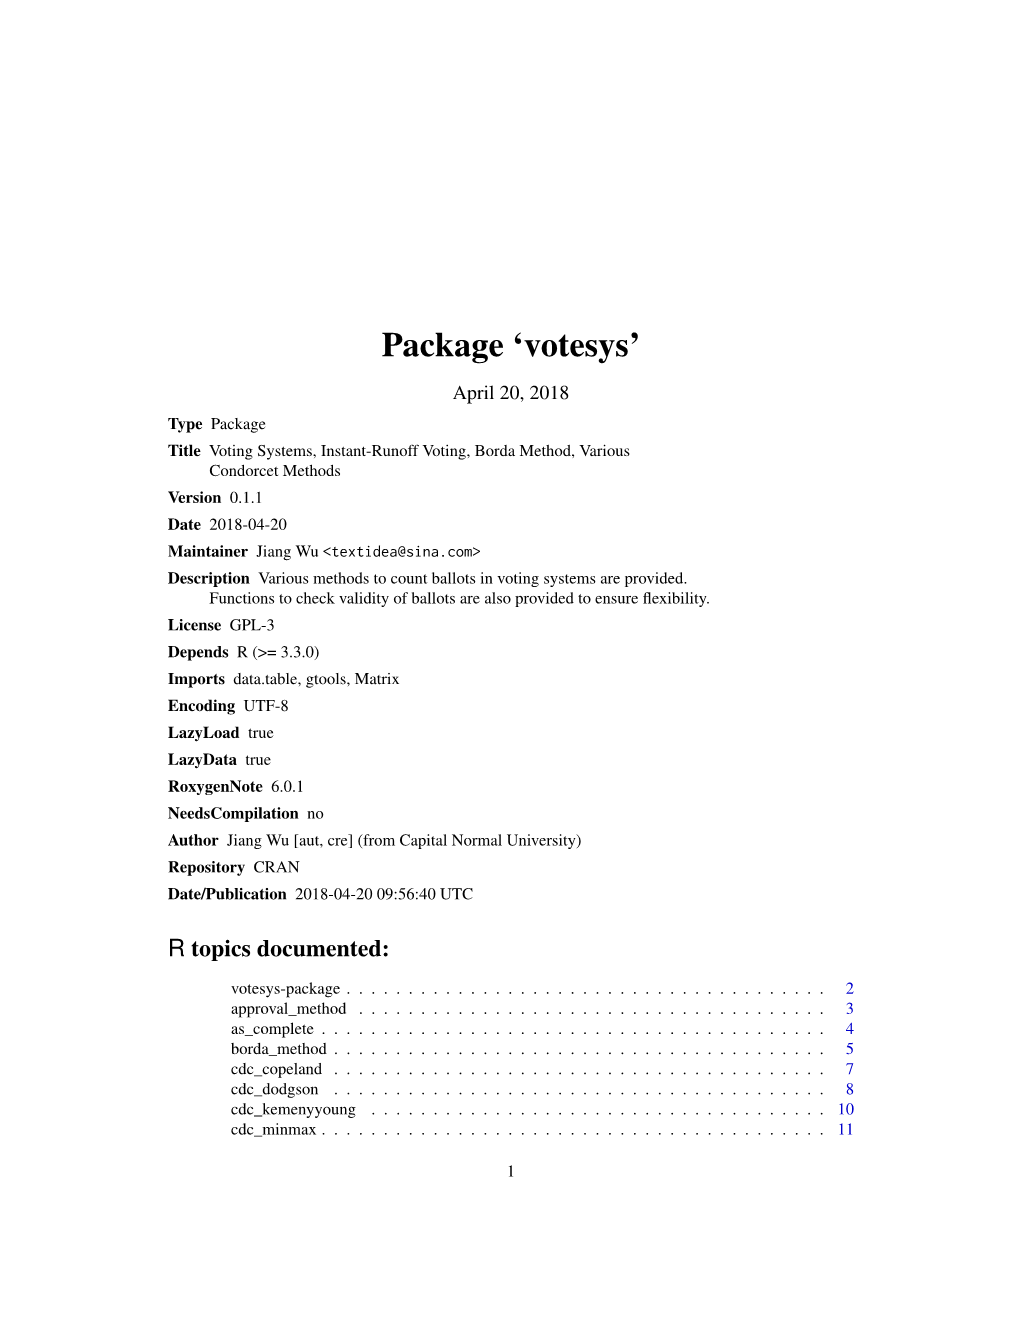 Package 'Votesys'